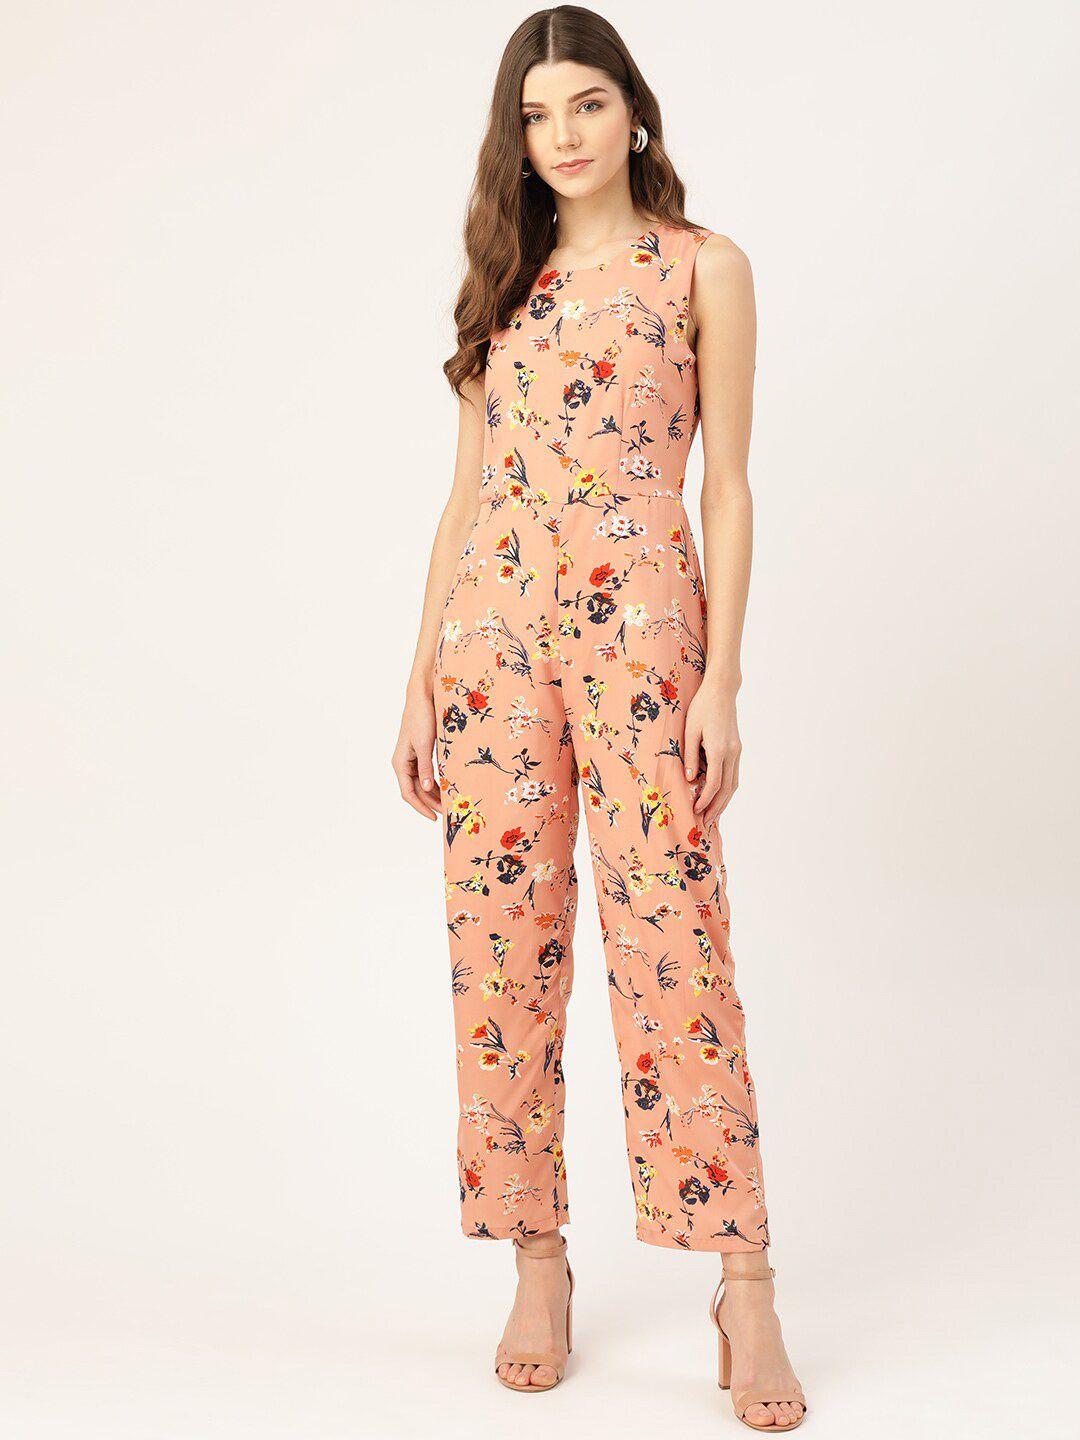 dodo & moa floral printed basic jumpsuit